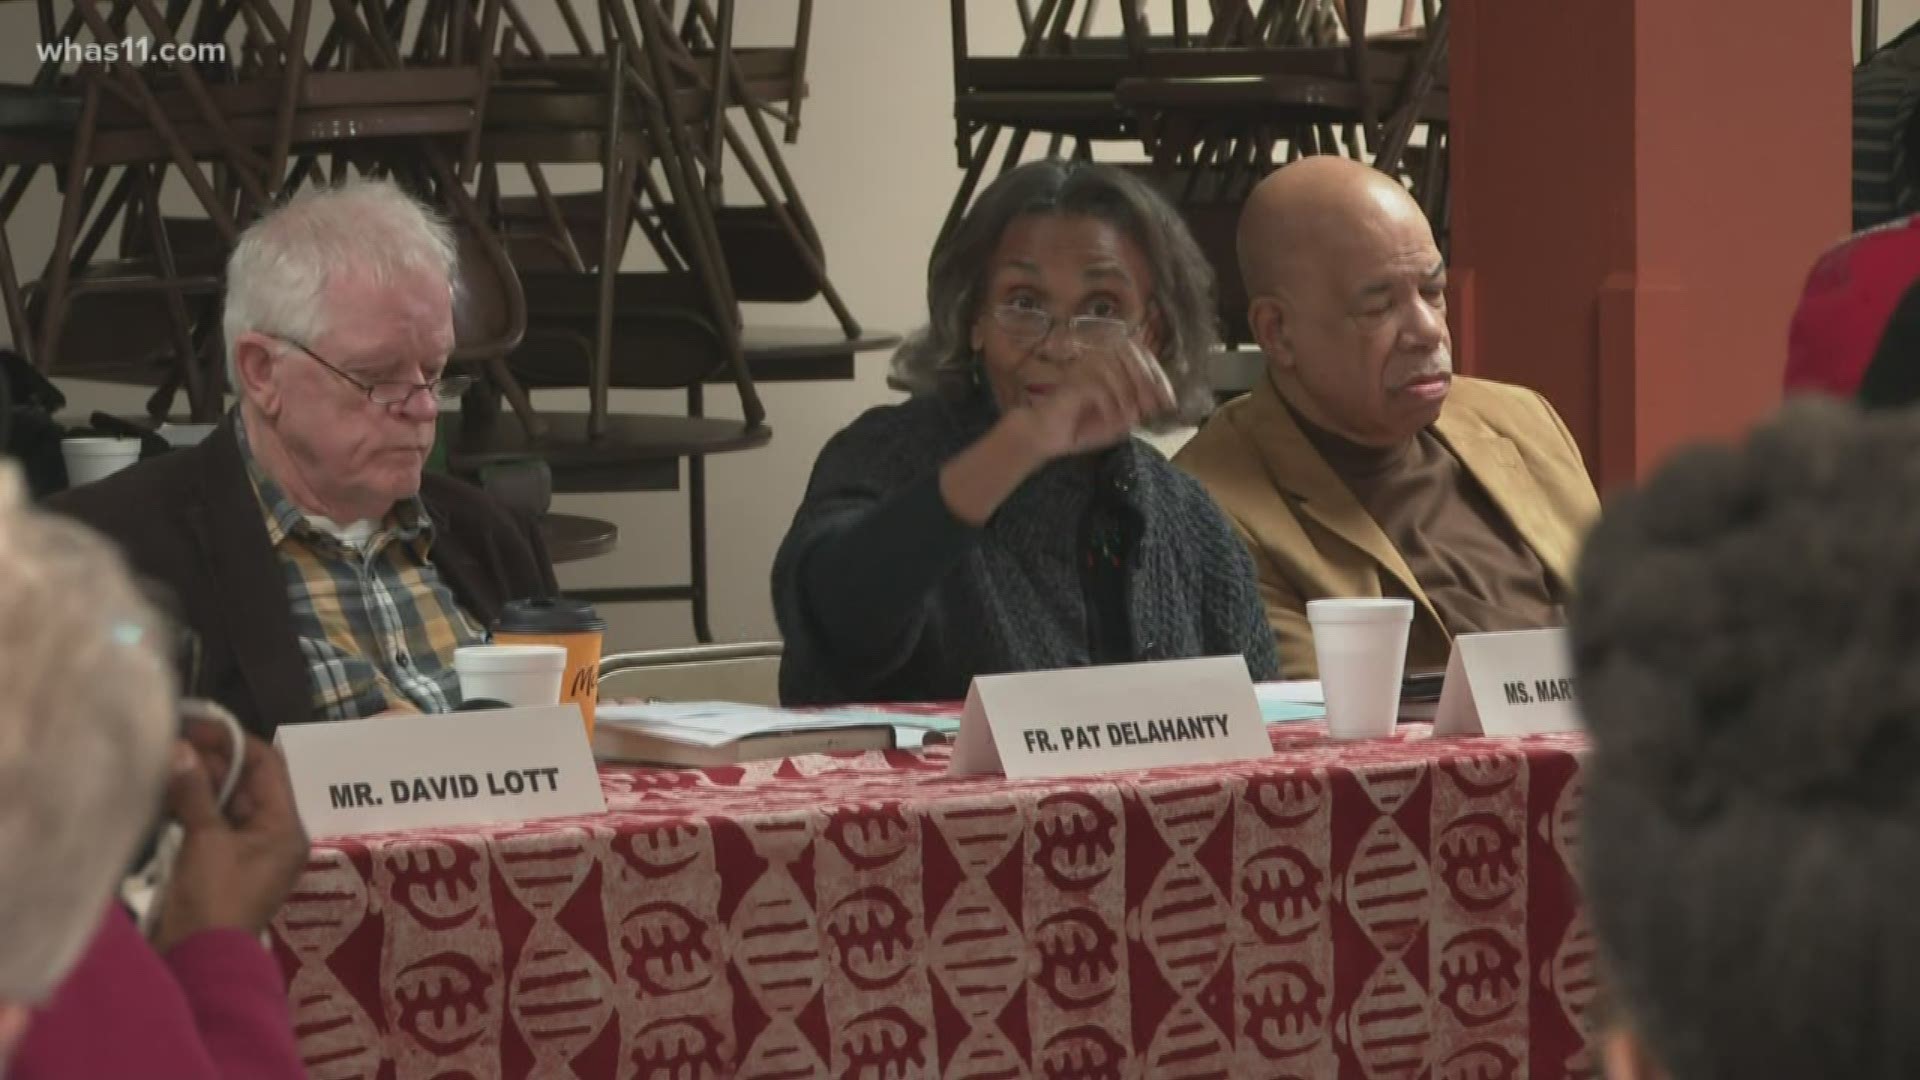 The goal of the event was to bring community leaders and members together to have a real conversation about reparations.